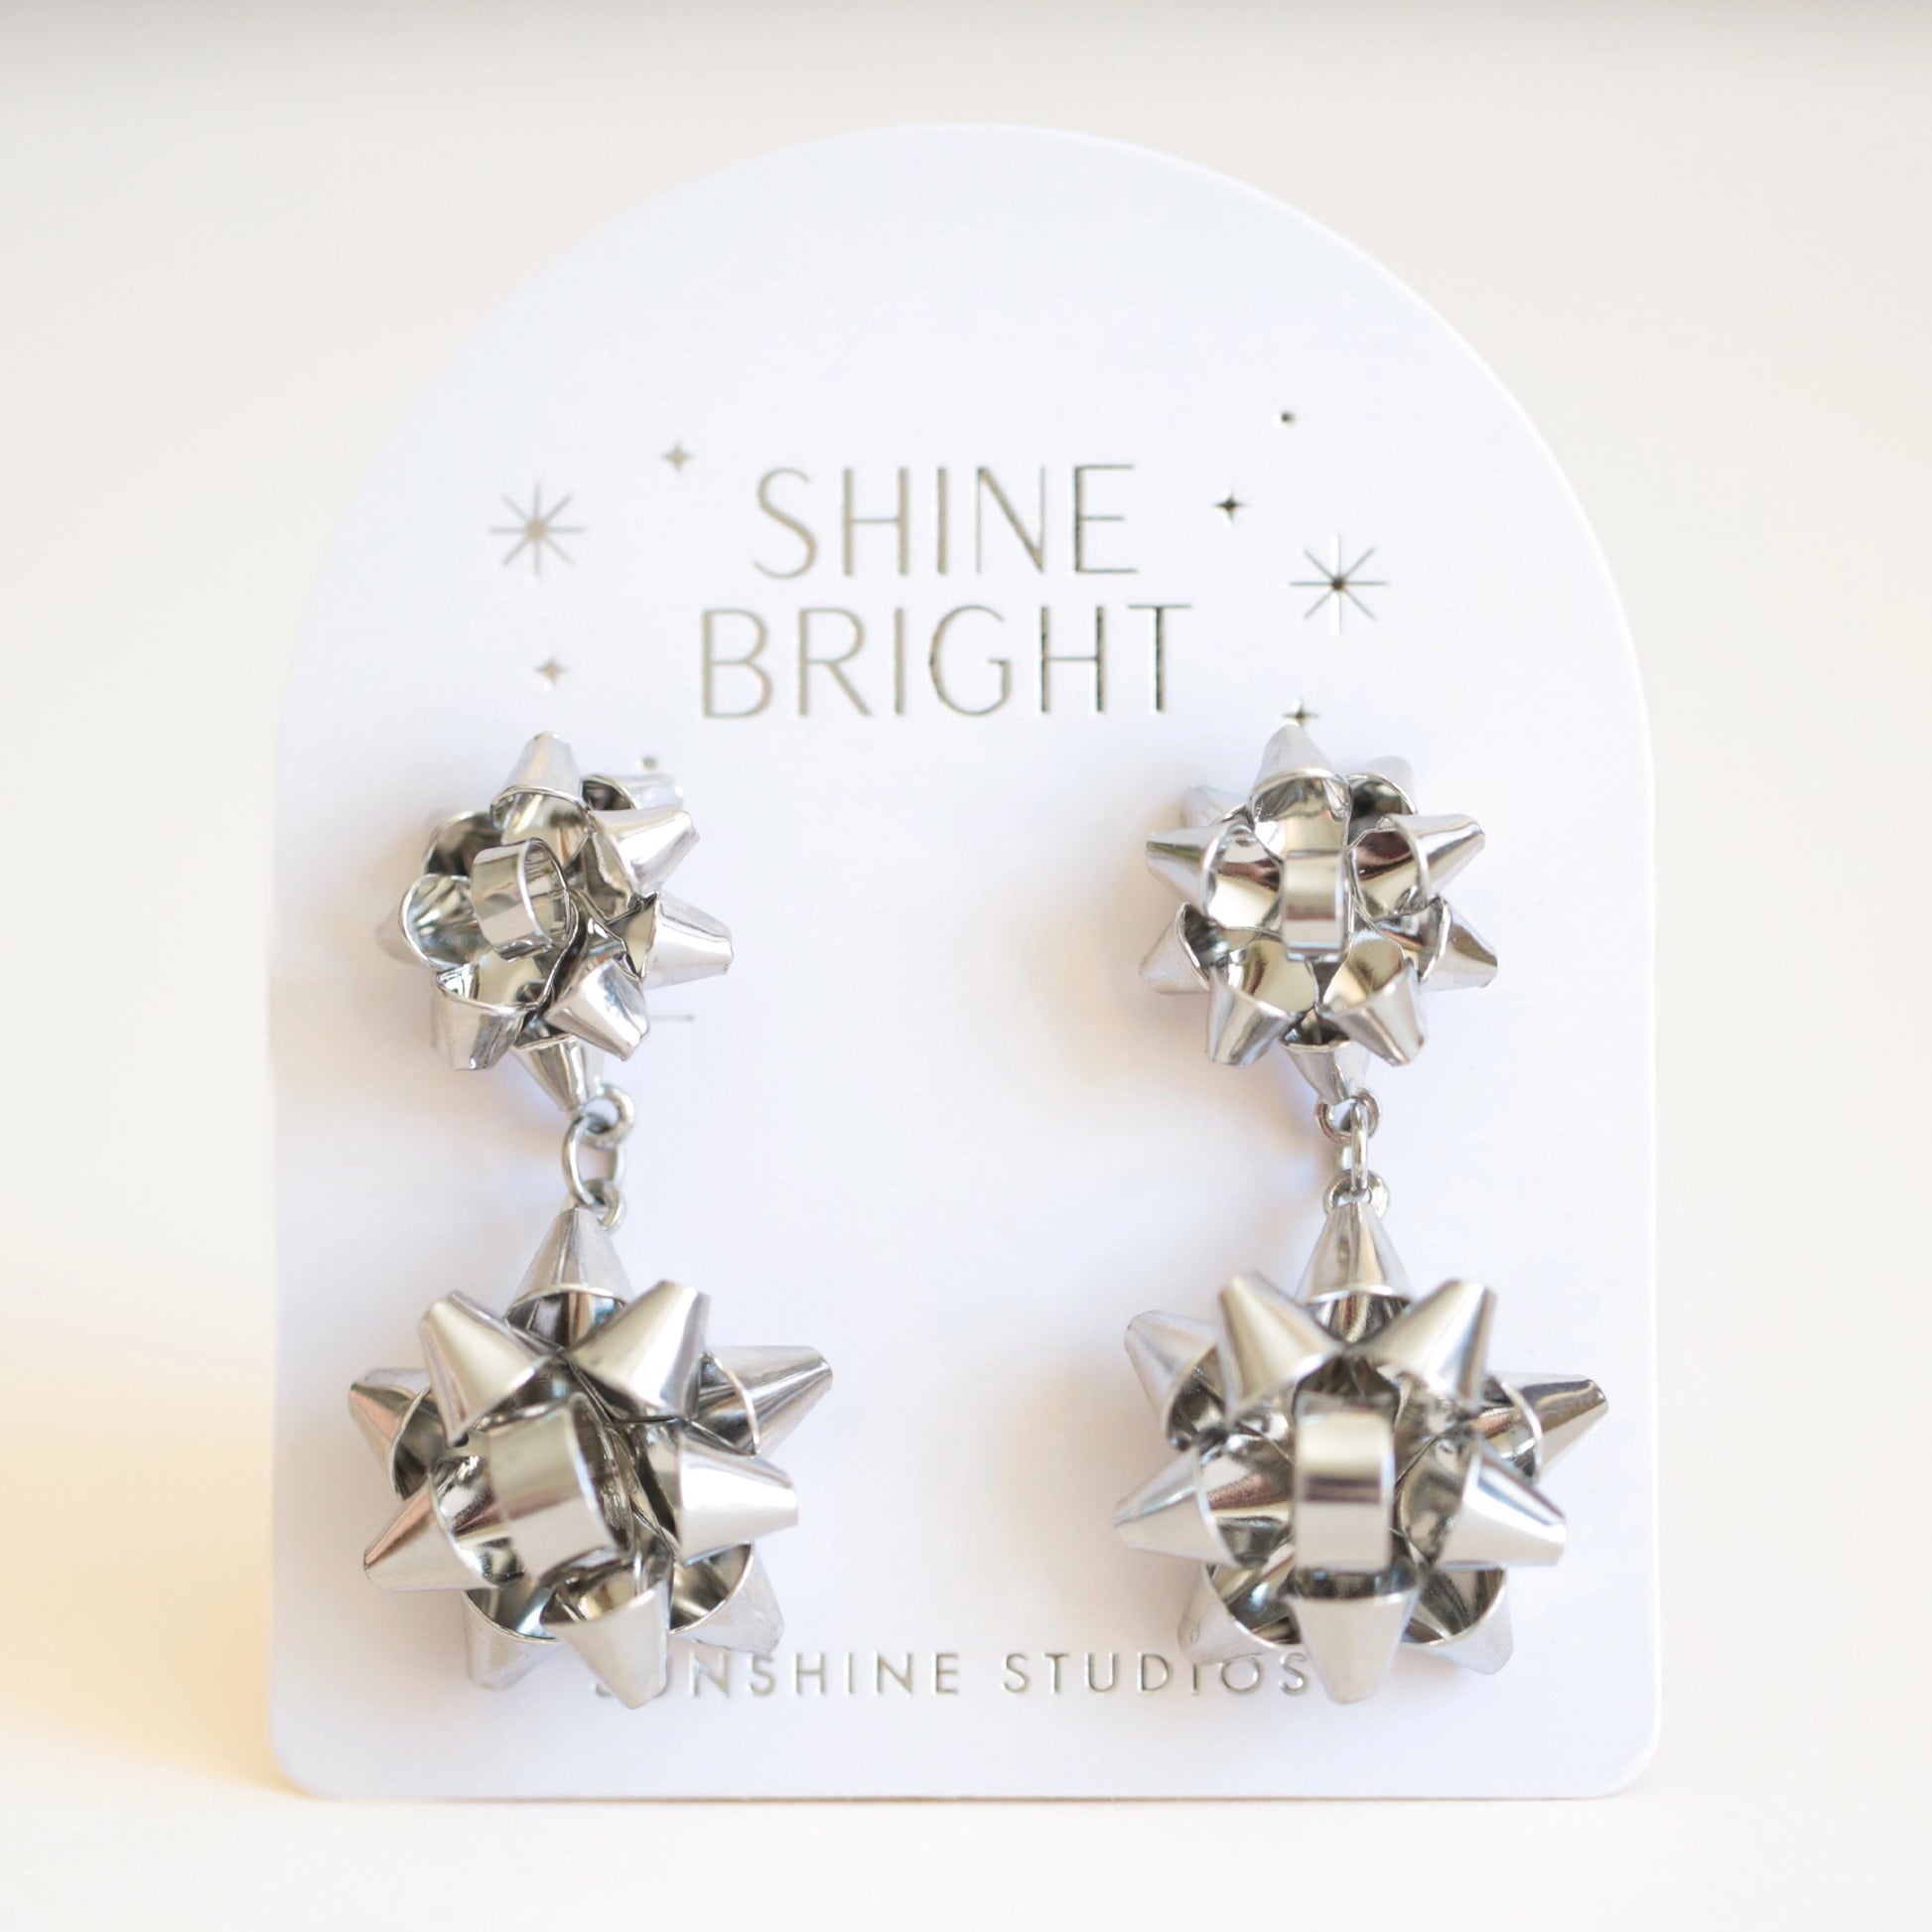 On an ivory background is a pair of silver holiday bow shaped earrings that have a smaller gold bow and a dangling larger bow attached to the bottom. The packaging reads, "Shine Bright Sunshine Studios".